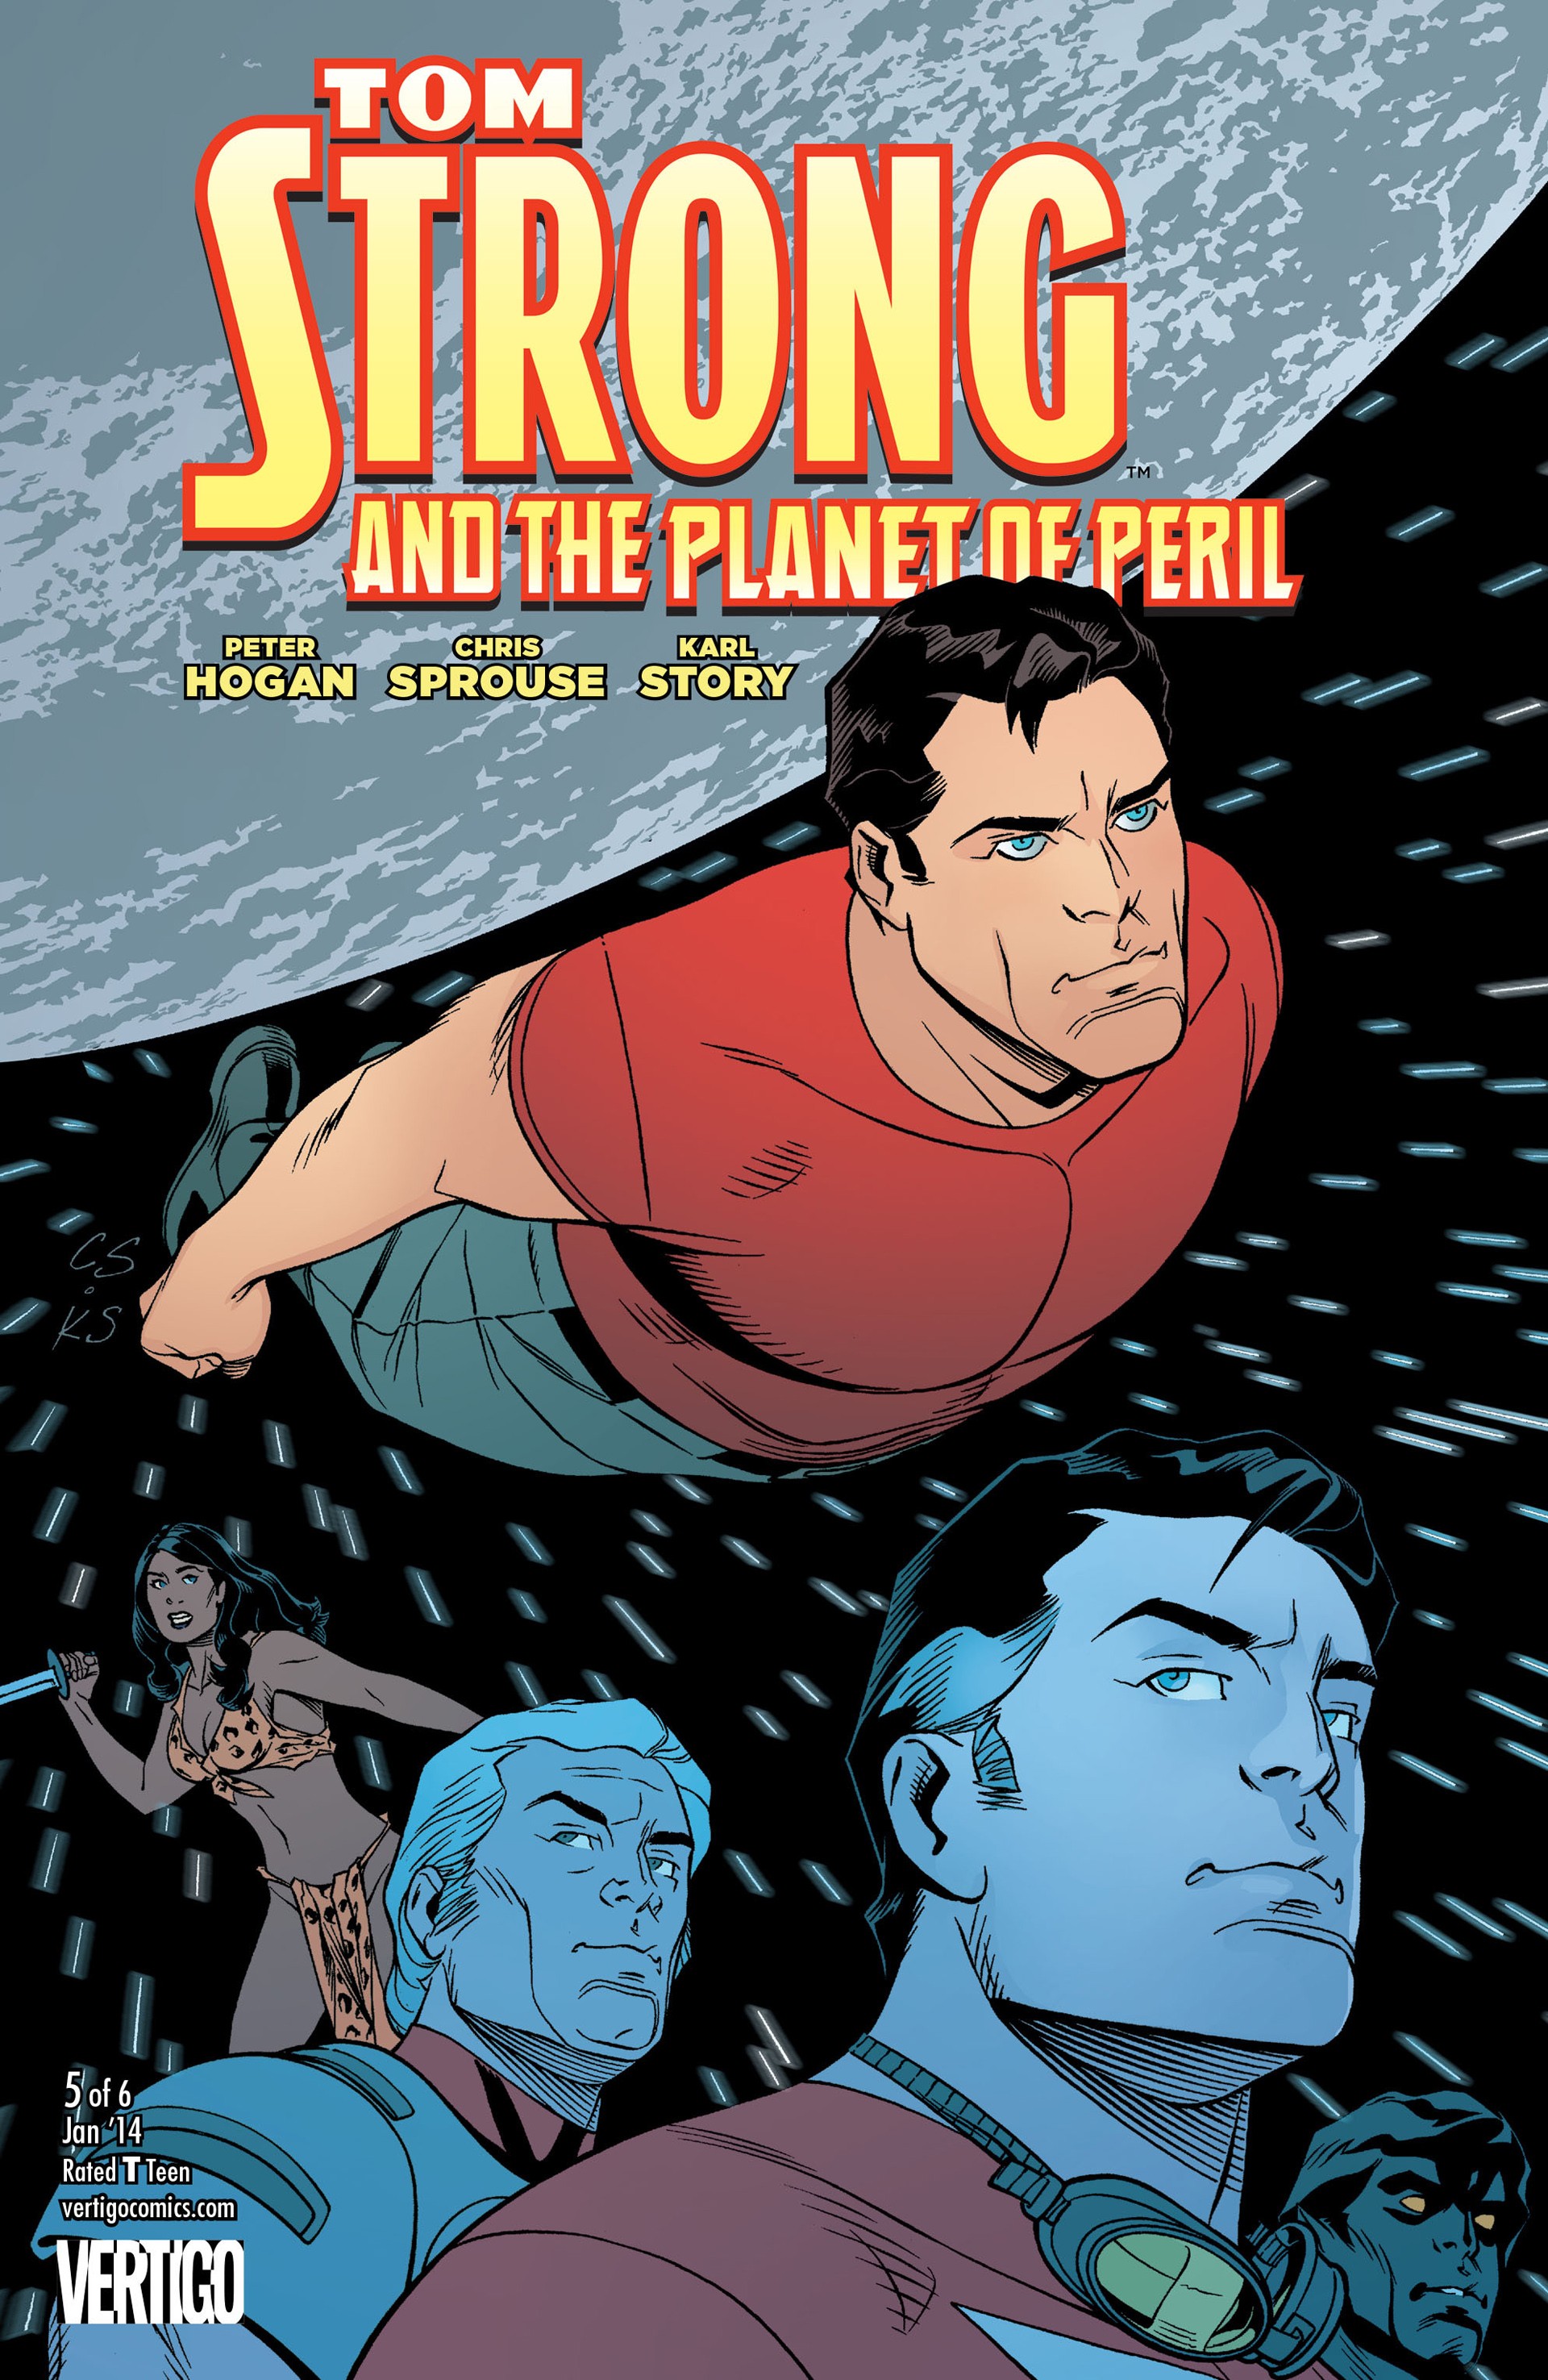 Tom Strong and the Planet of Peril Vol. 1 #5